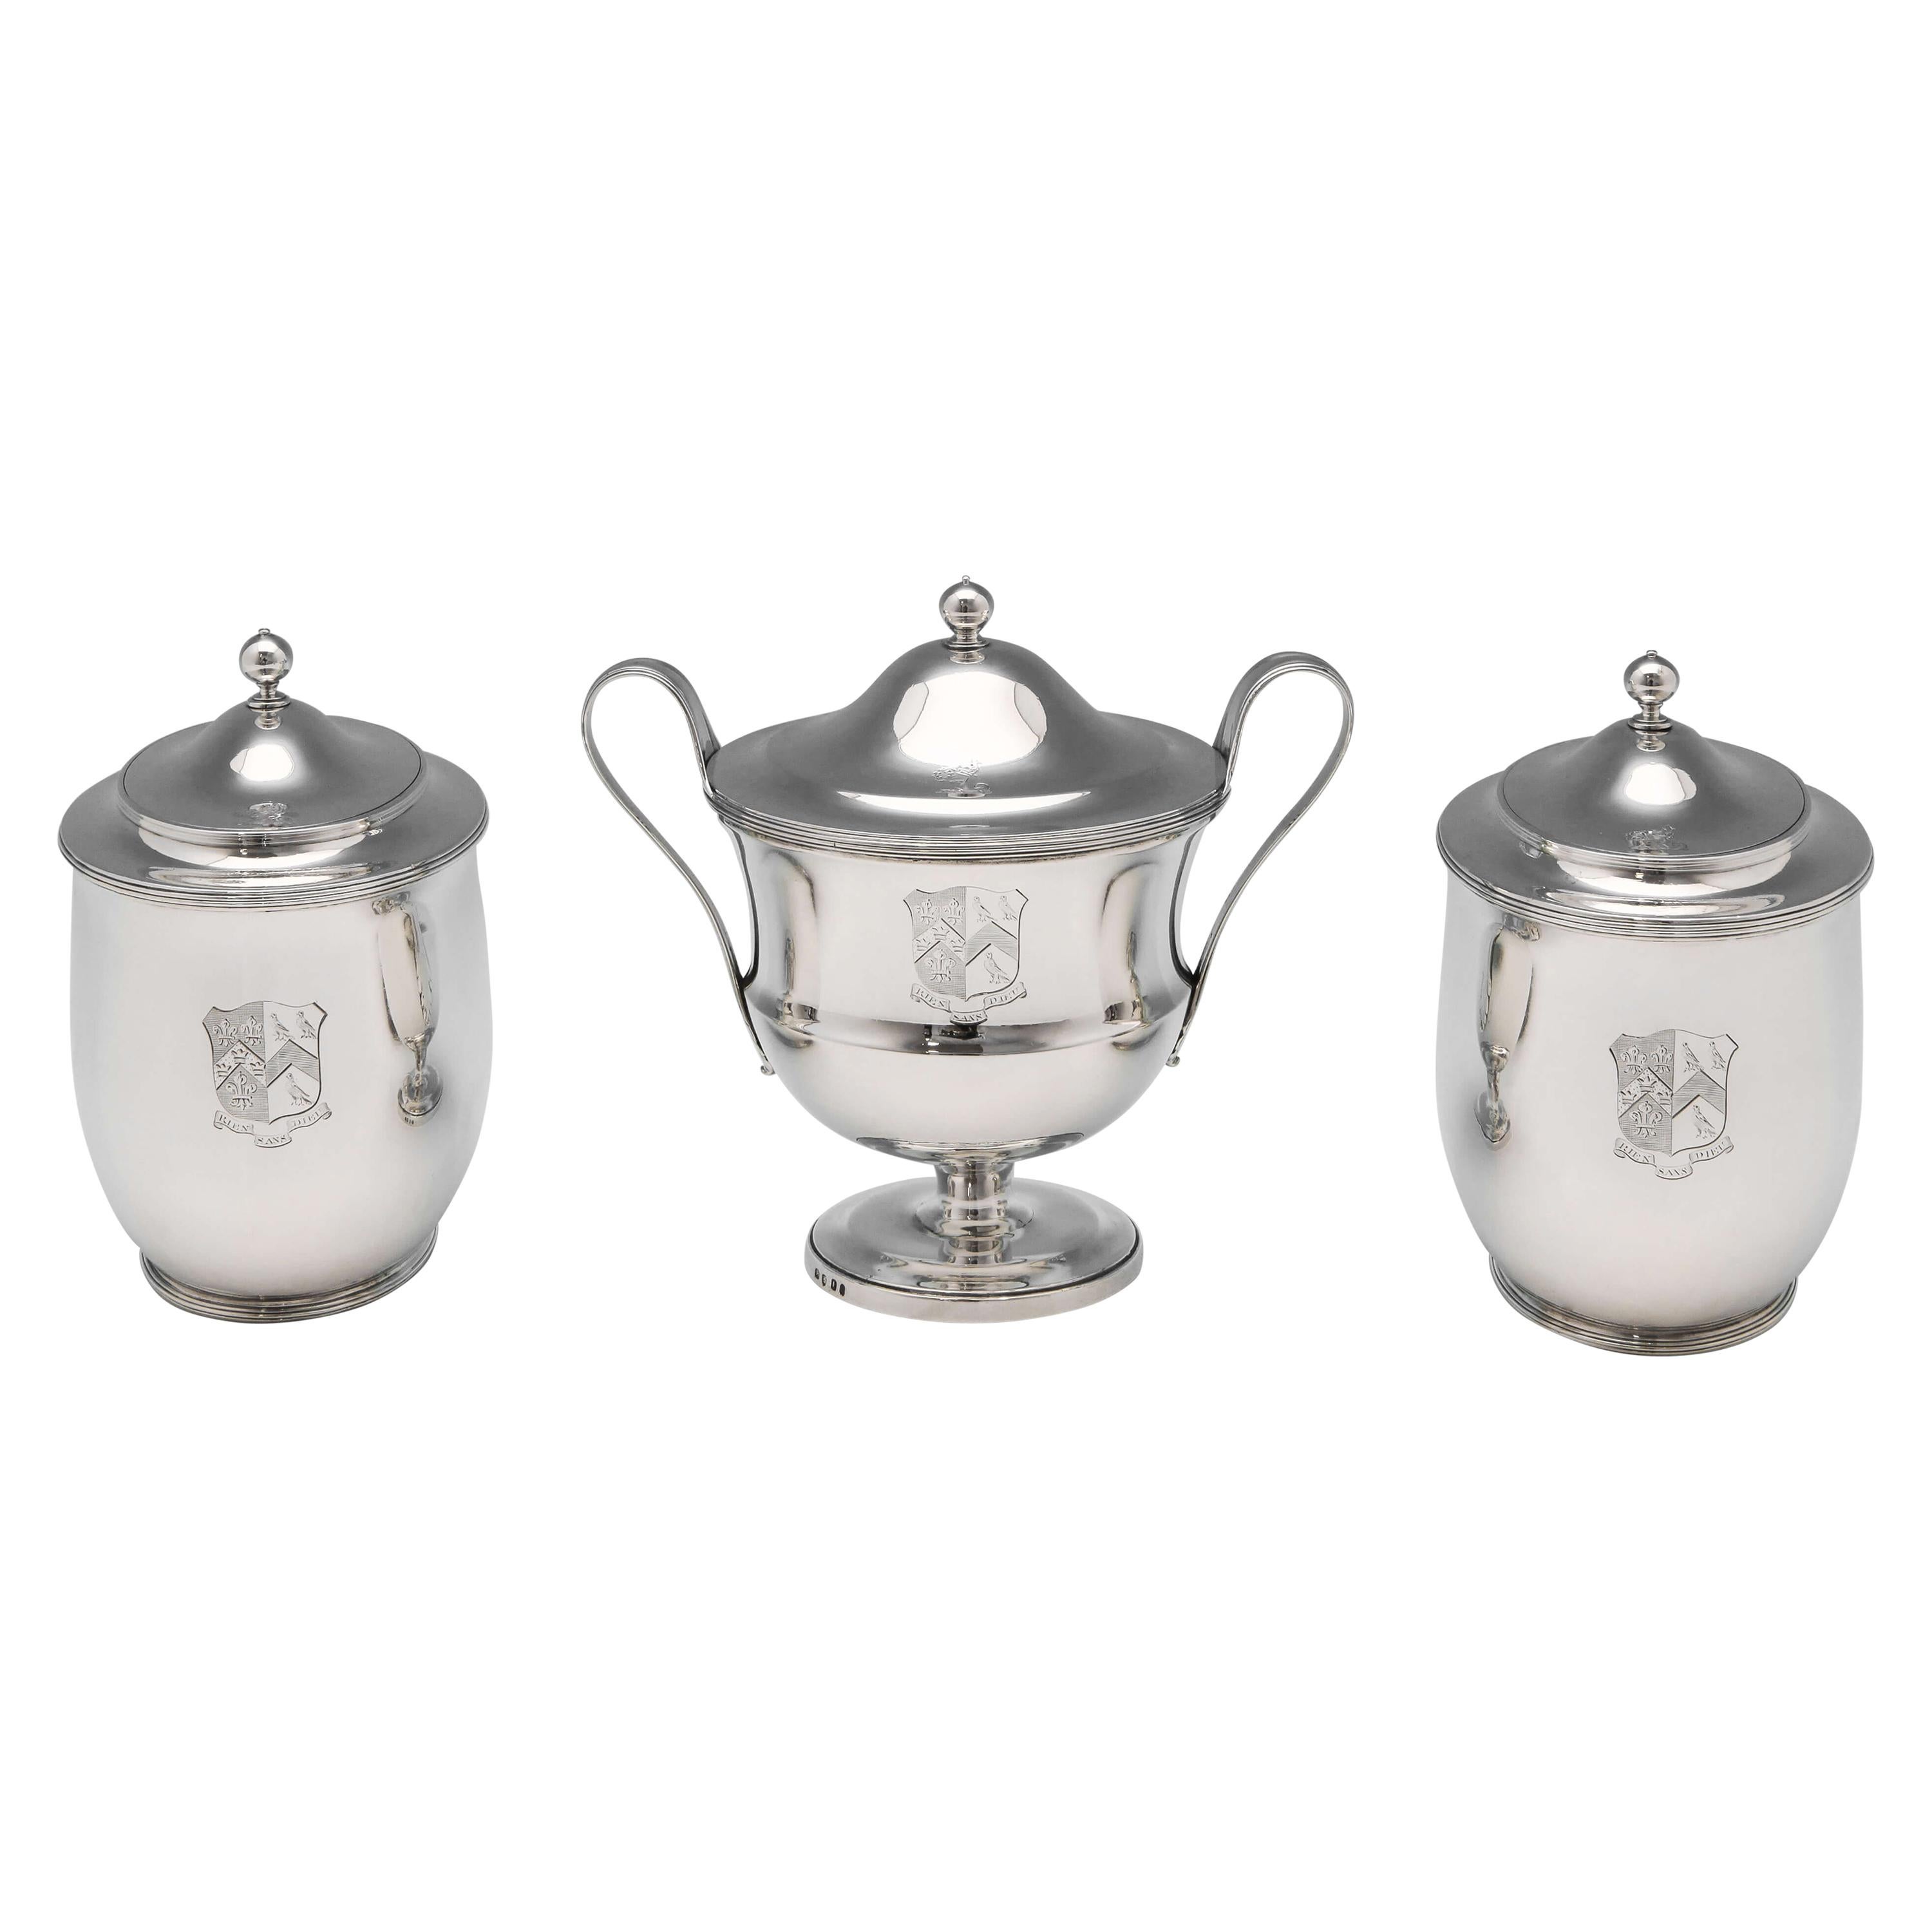 Neoclassical Antique Sterling Silver Tea Caddy Set from 1797 by Robert Sharp For Sale